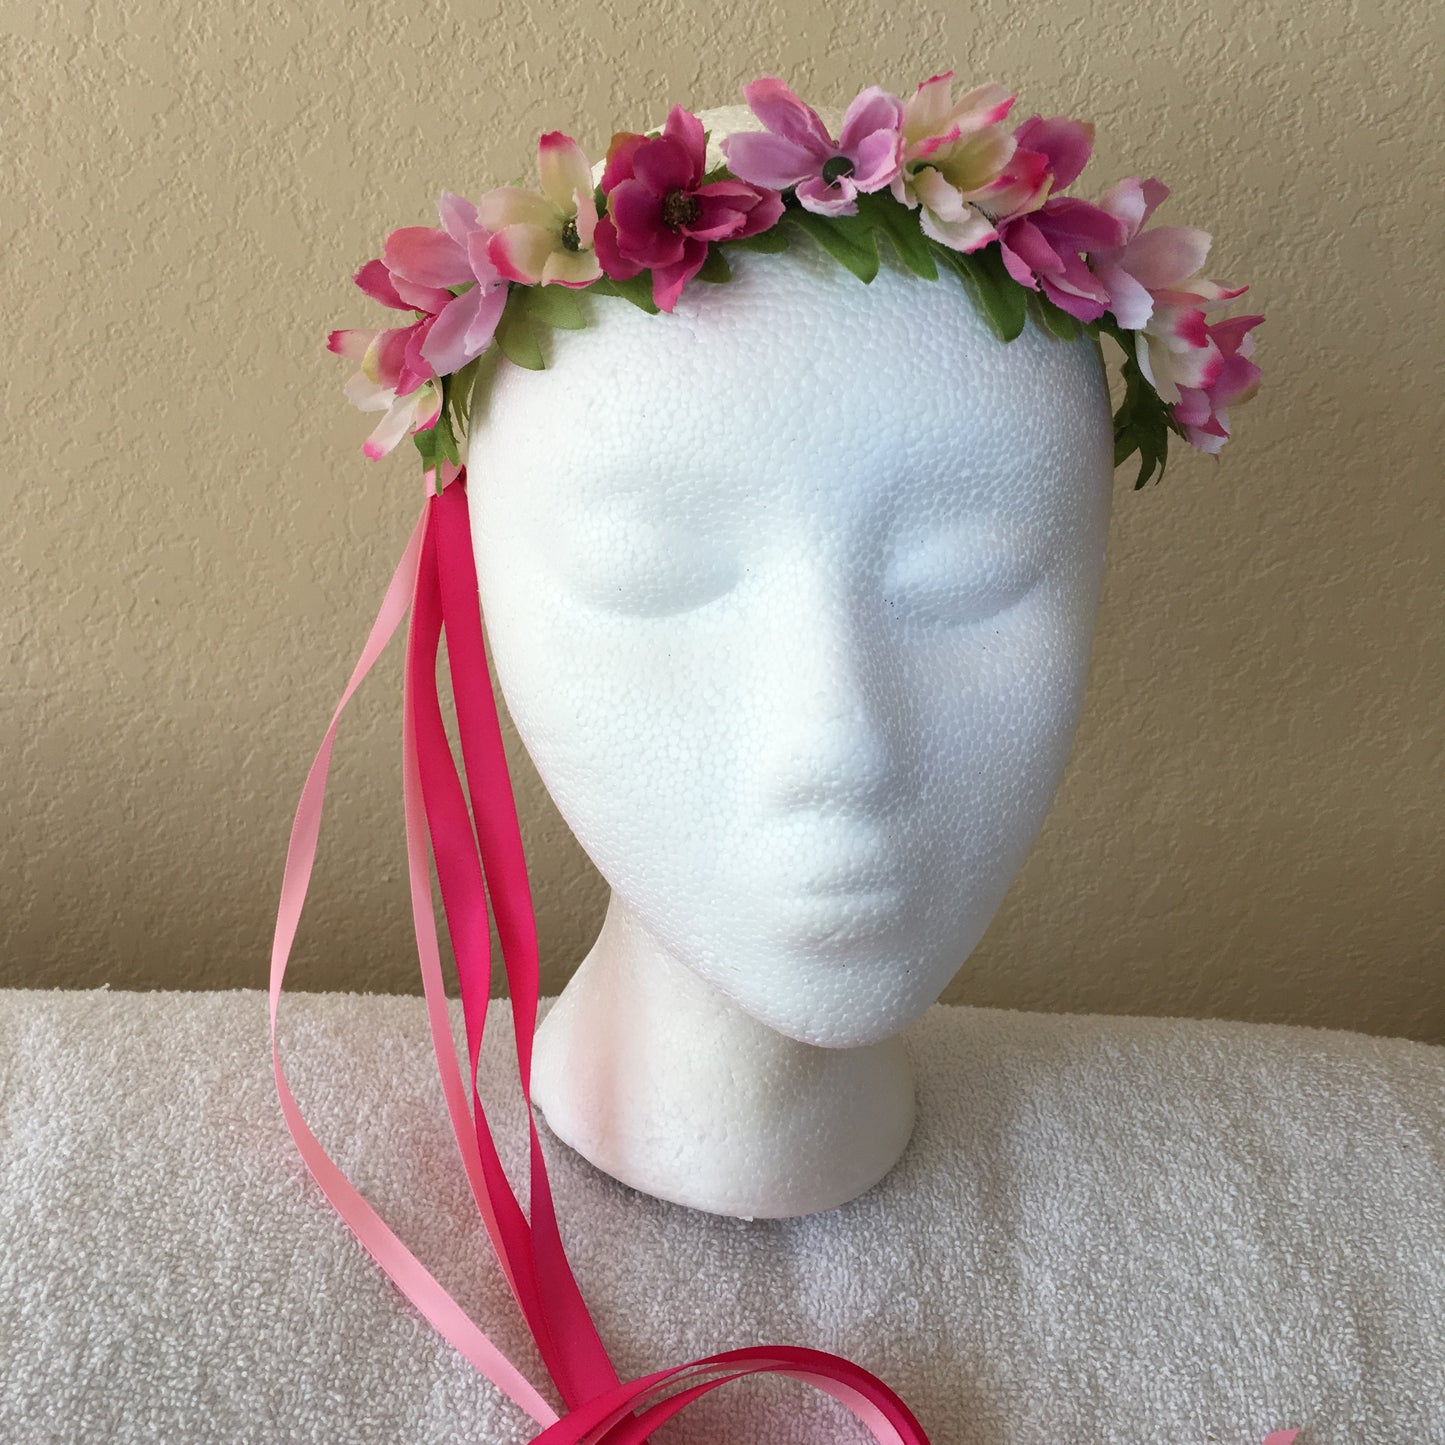 Extra Small Wreath - Bright pink, pale pink, & white pink tipped flowers